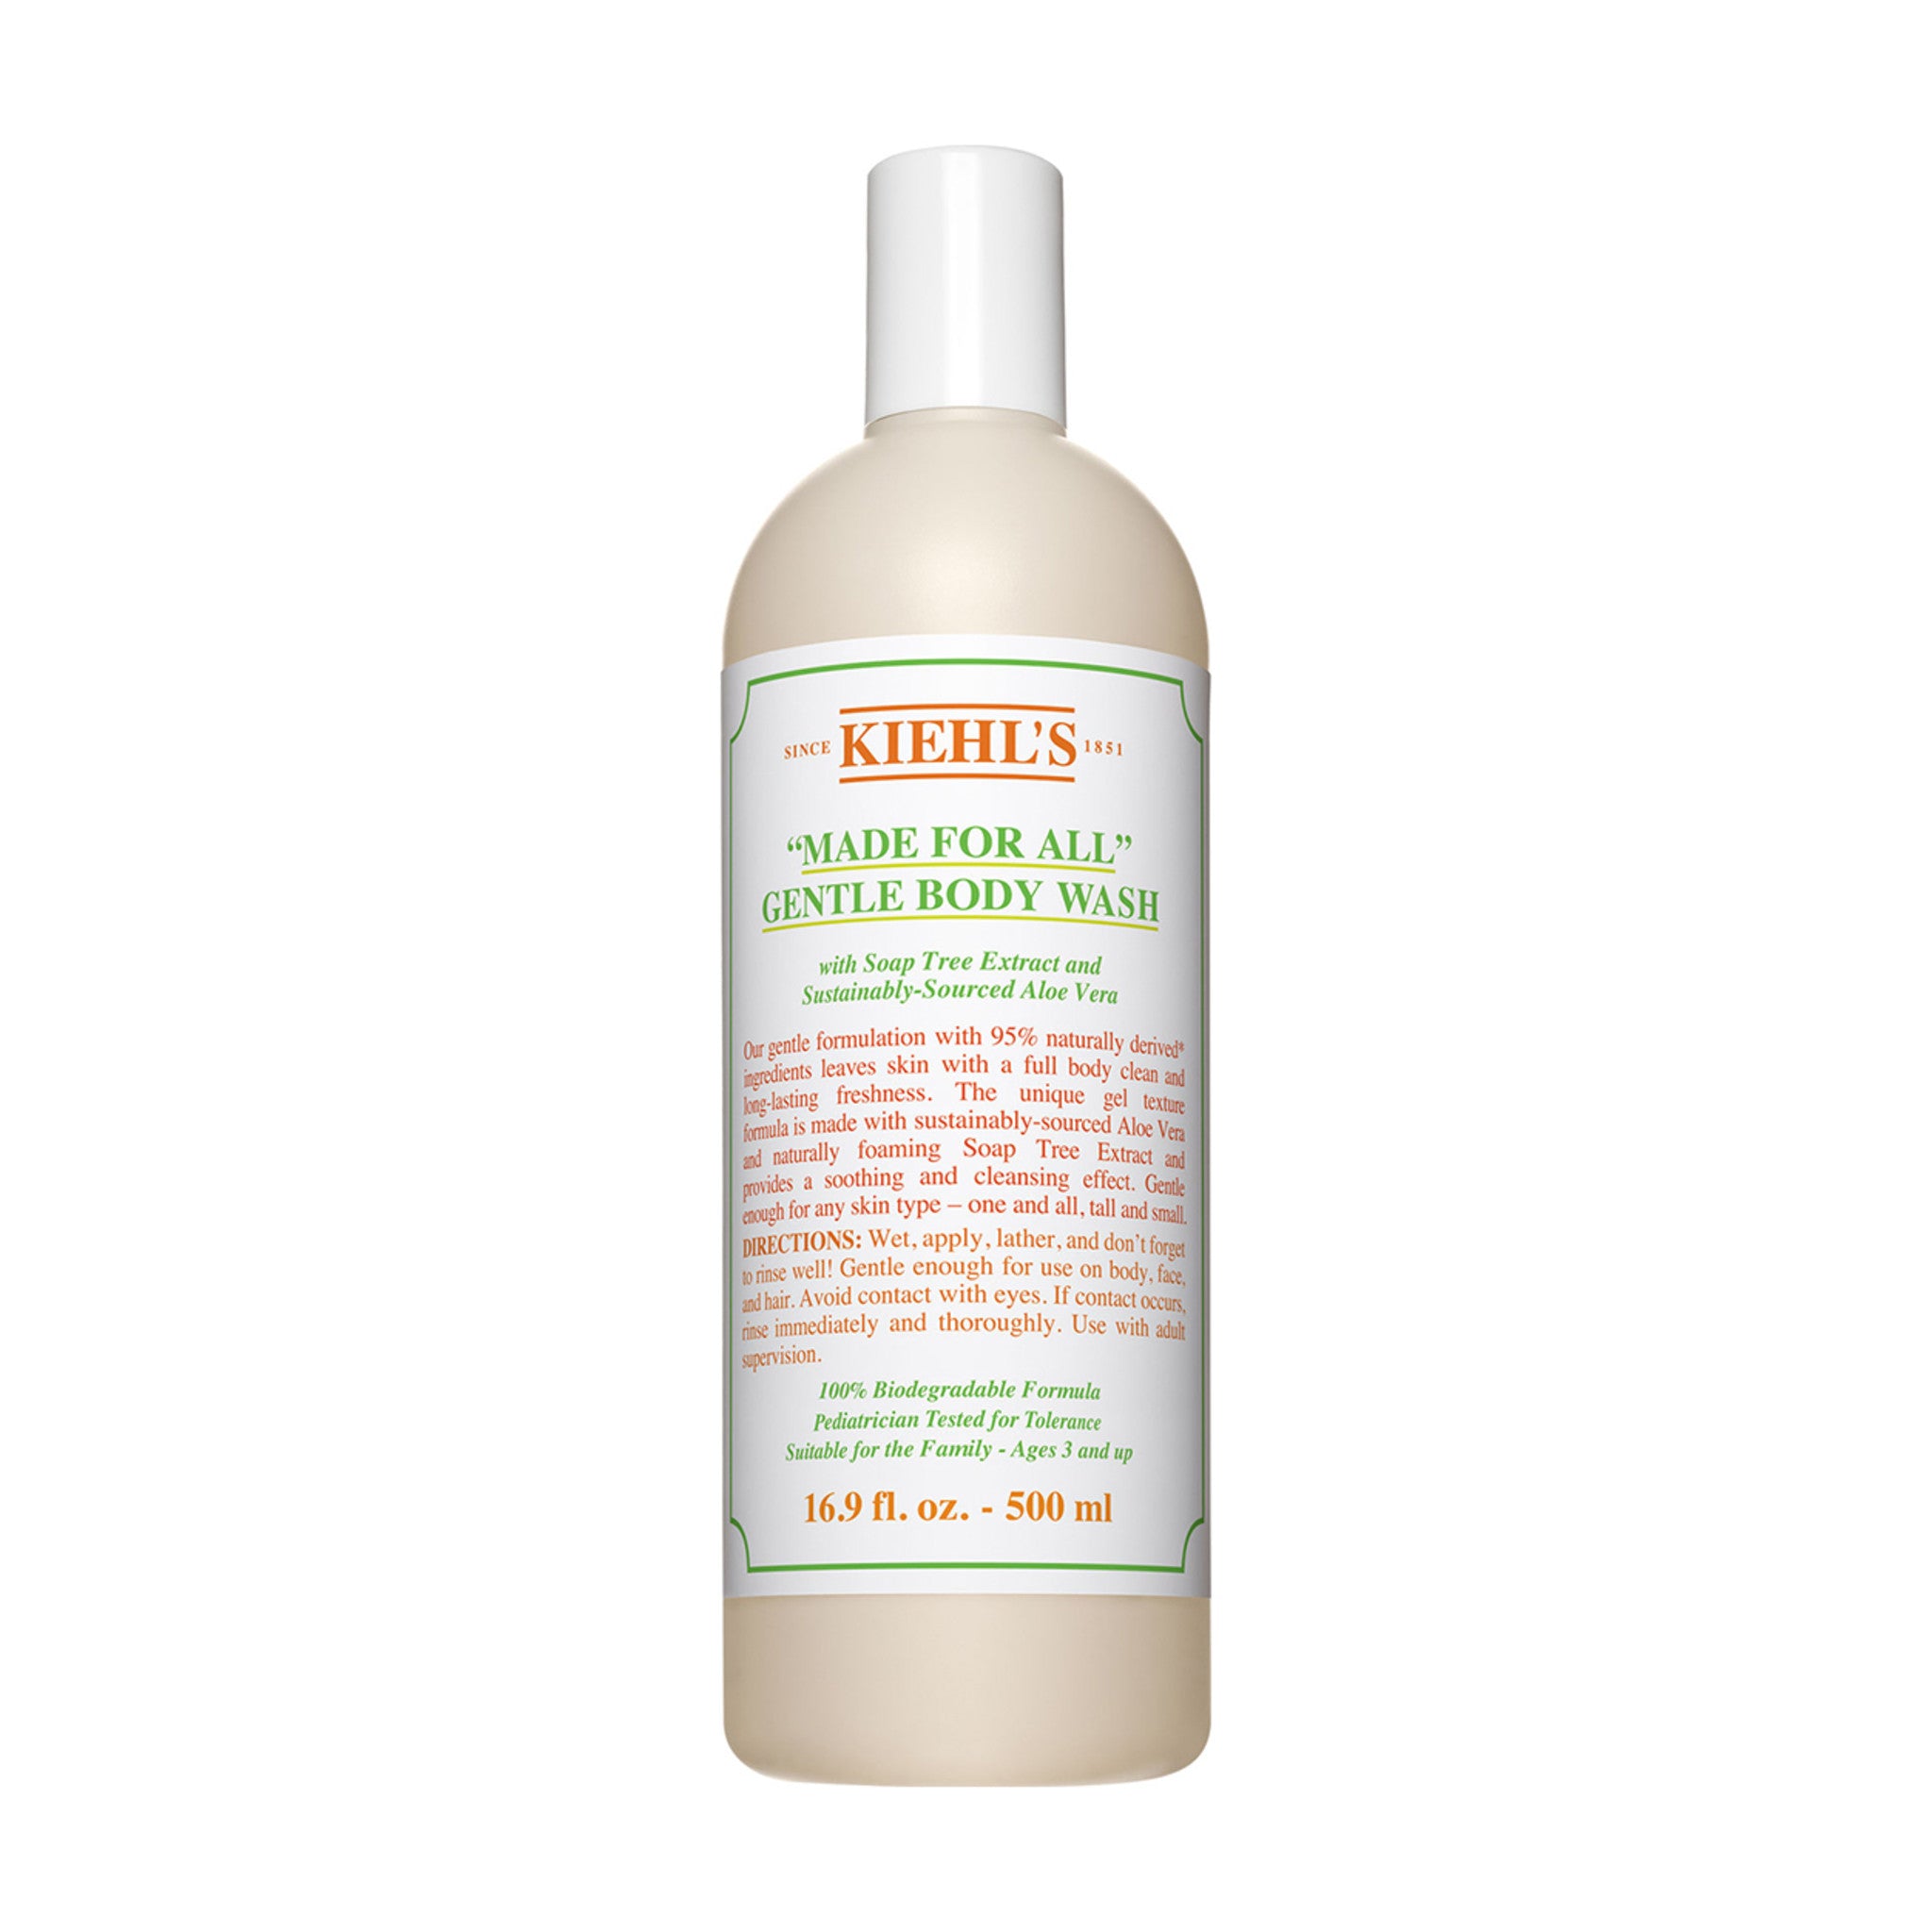 Kiehl's Since 1851 Made For All Gentle Body Wash main image.